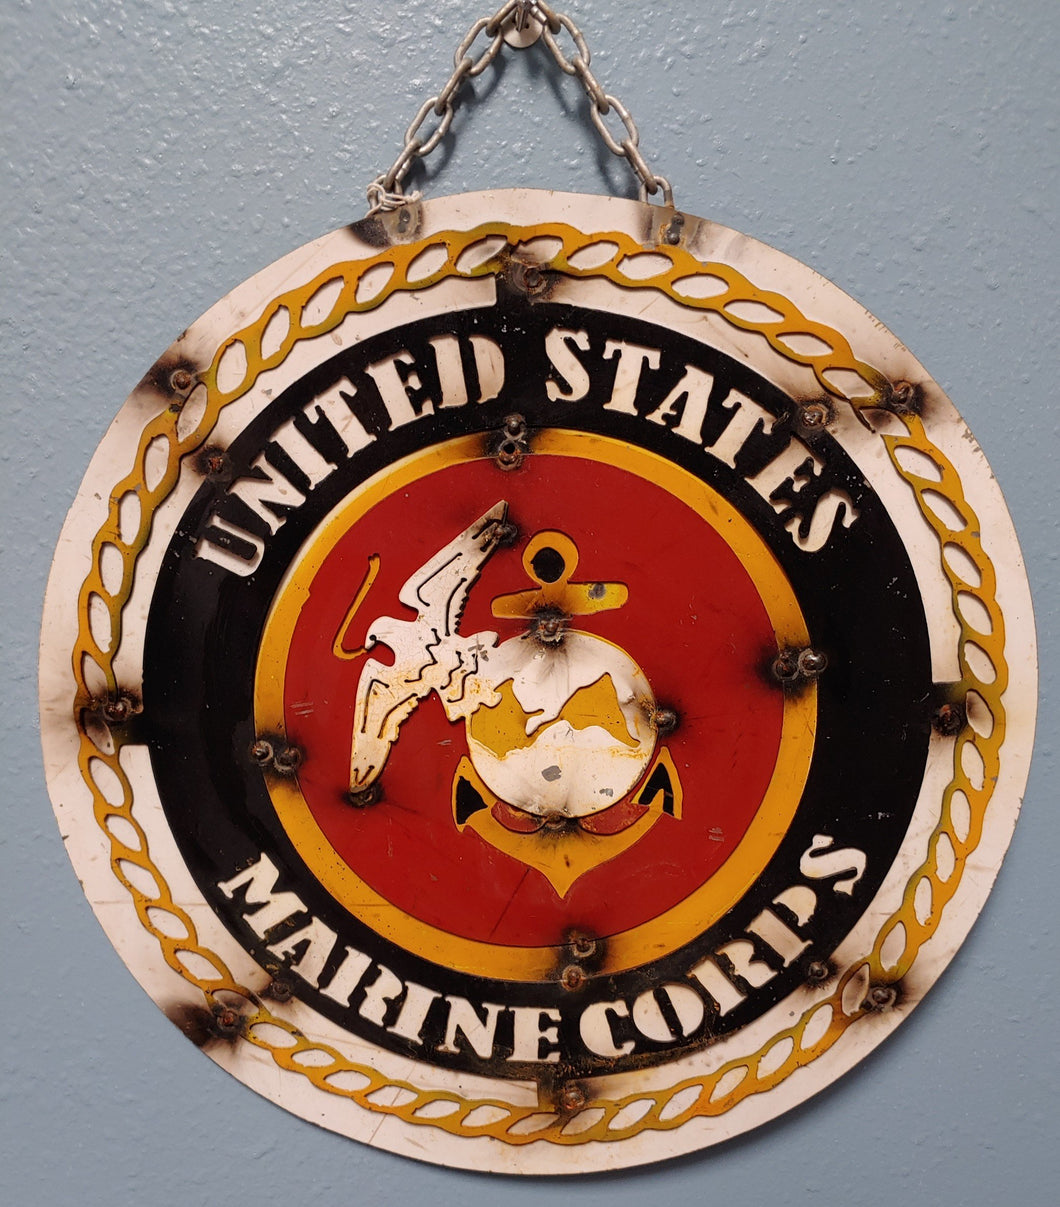 Heavy gauge round metal sign hanging on a sturdy metal chain.  United States Marine emblem with red background, navy and with white lettering and gold chain decor with white background. weathered and rusted finish.  Very handsome sign.